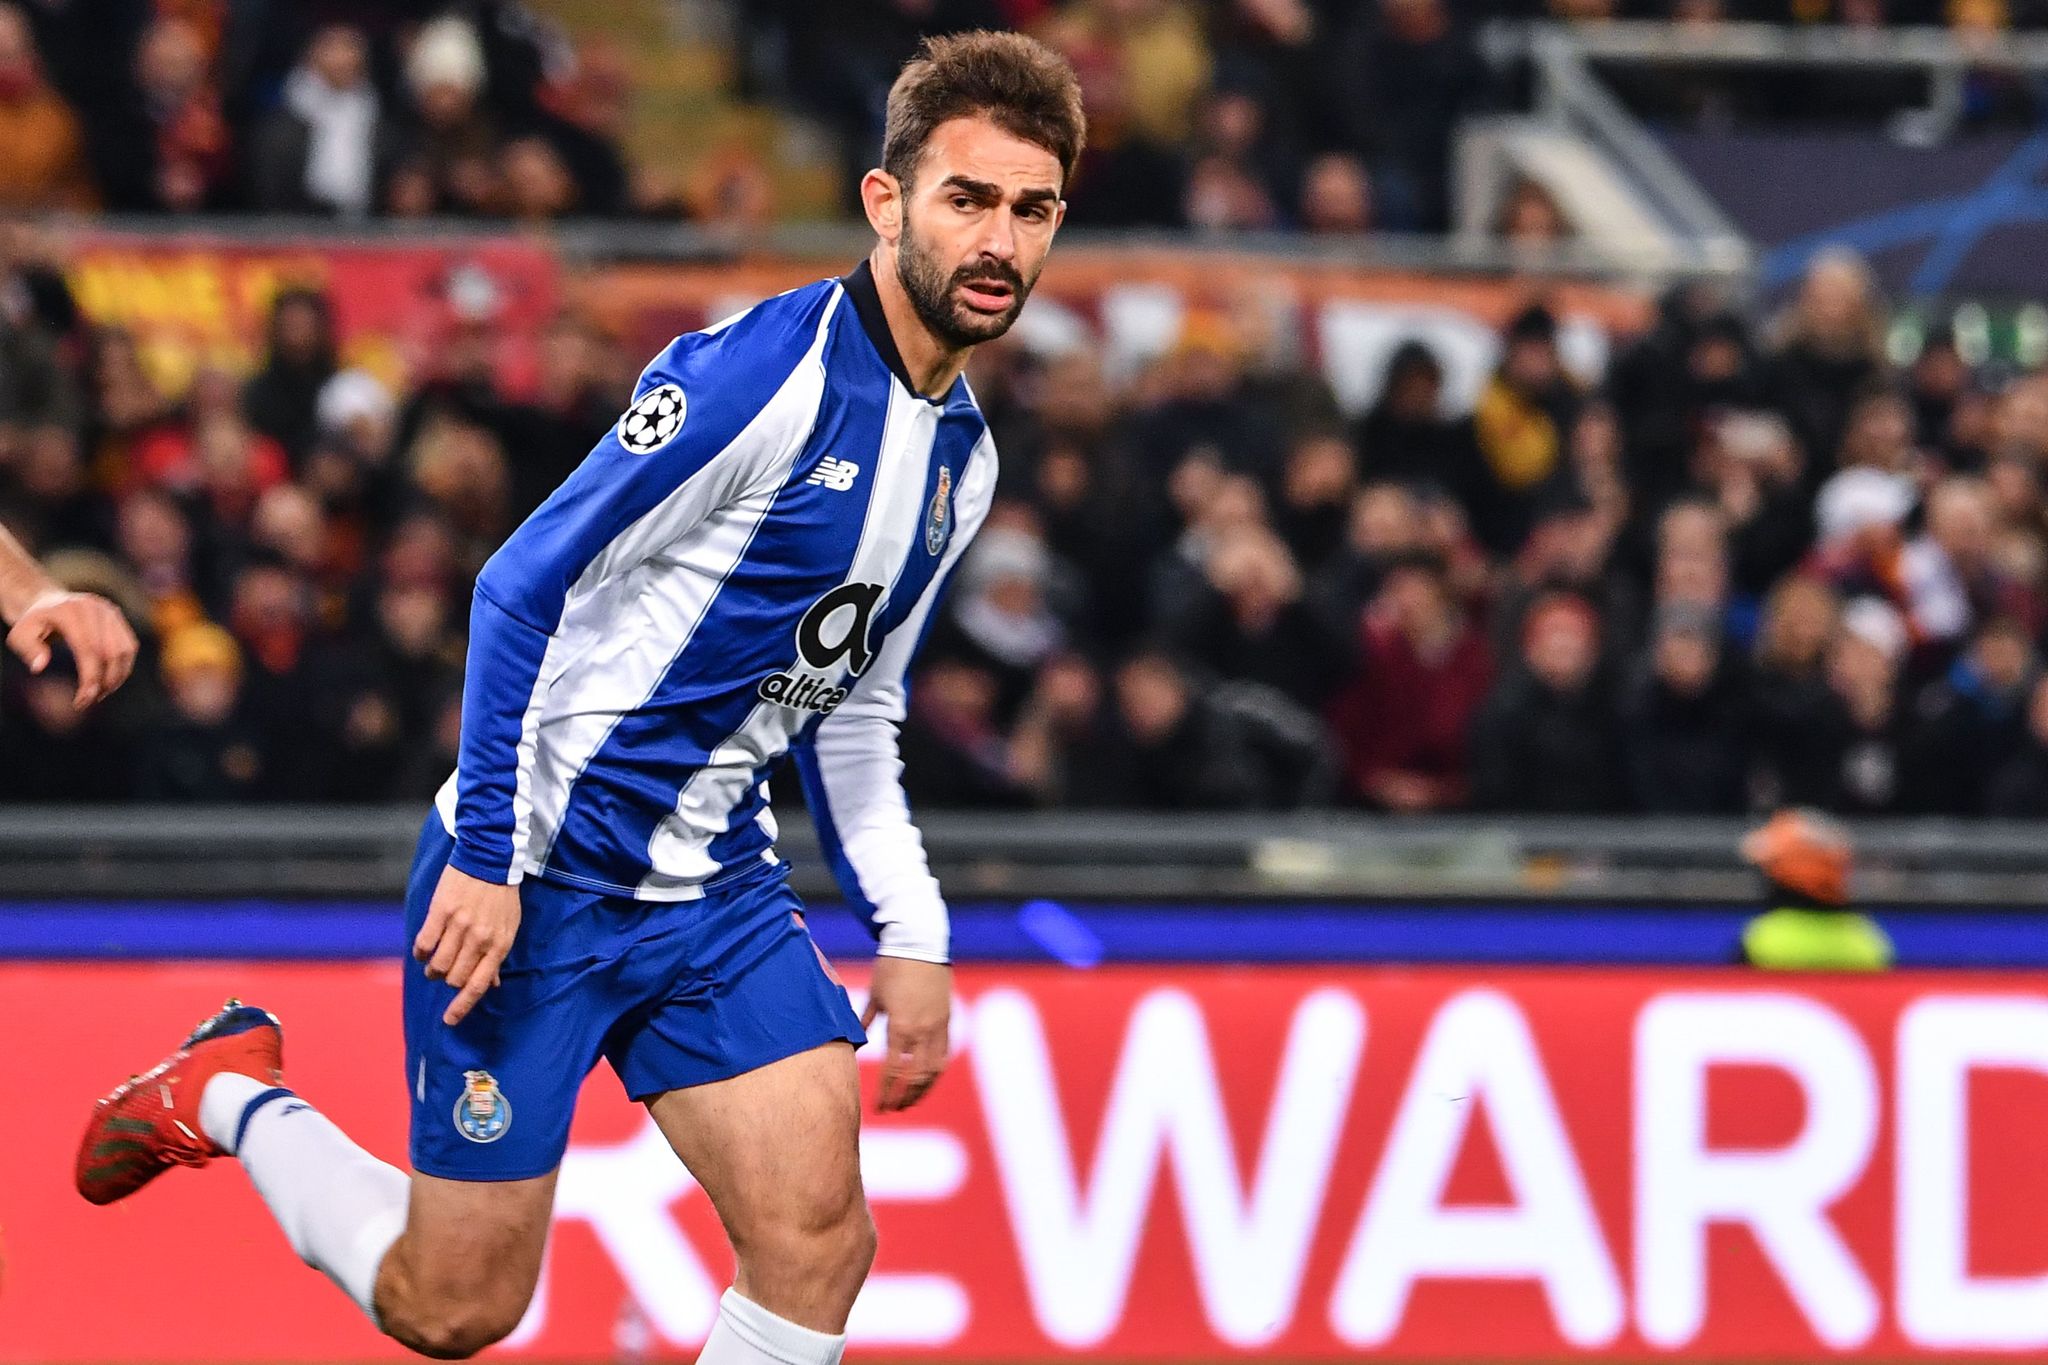 Portos Spanish forward Adrian Lopez celebrates after scoring during the UEFA Champions League round of 16, first leg football match AS Roma vs FC Porto on February 12, 2019 at the Olympic stadium in Rome. (Photo by Alberto PIZZOLI / AFP)